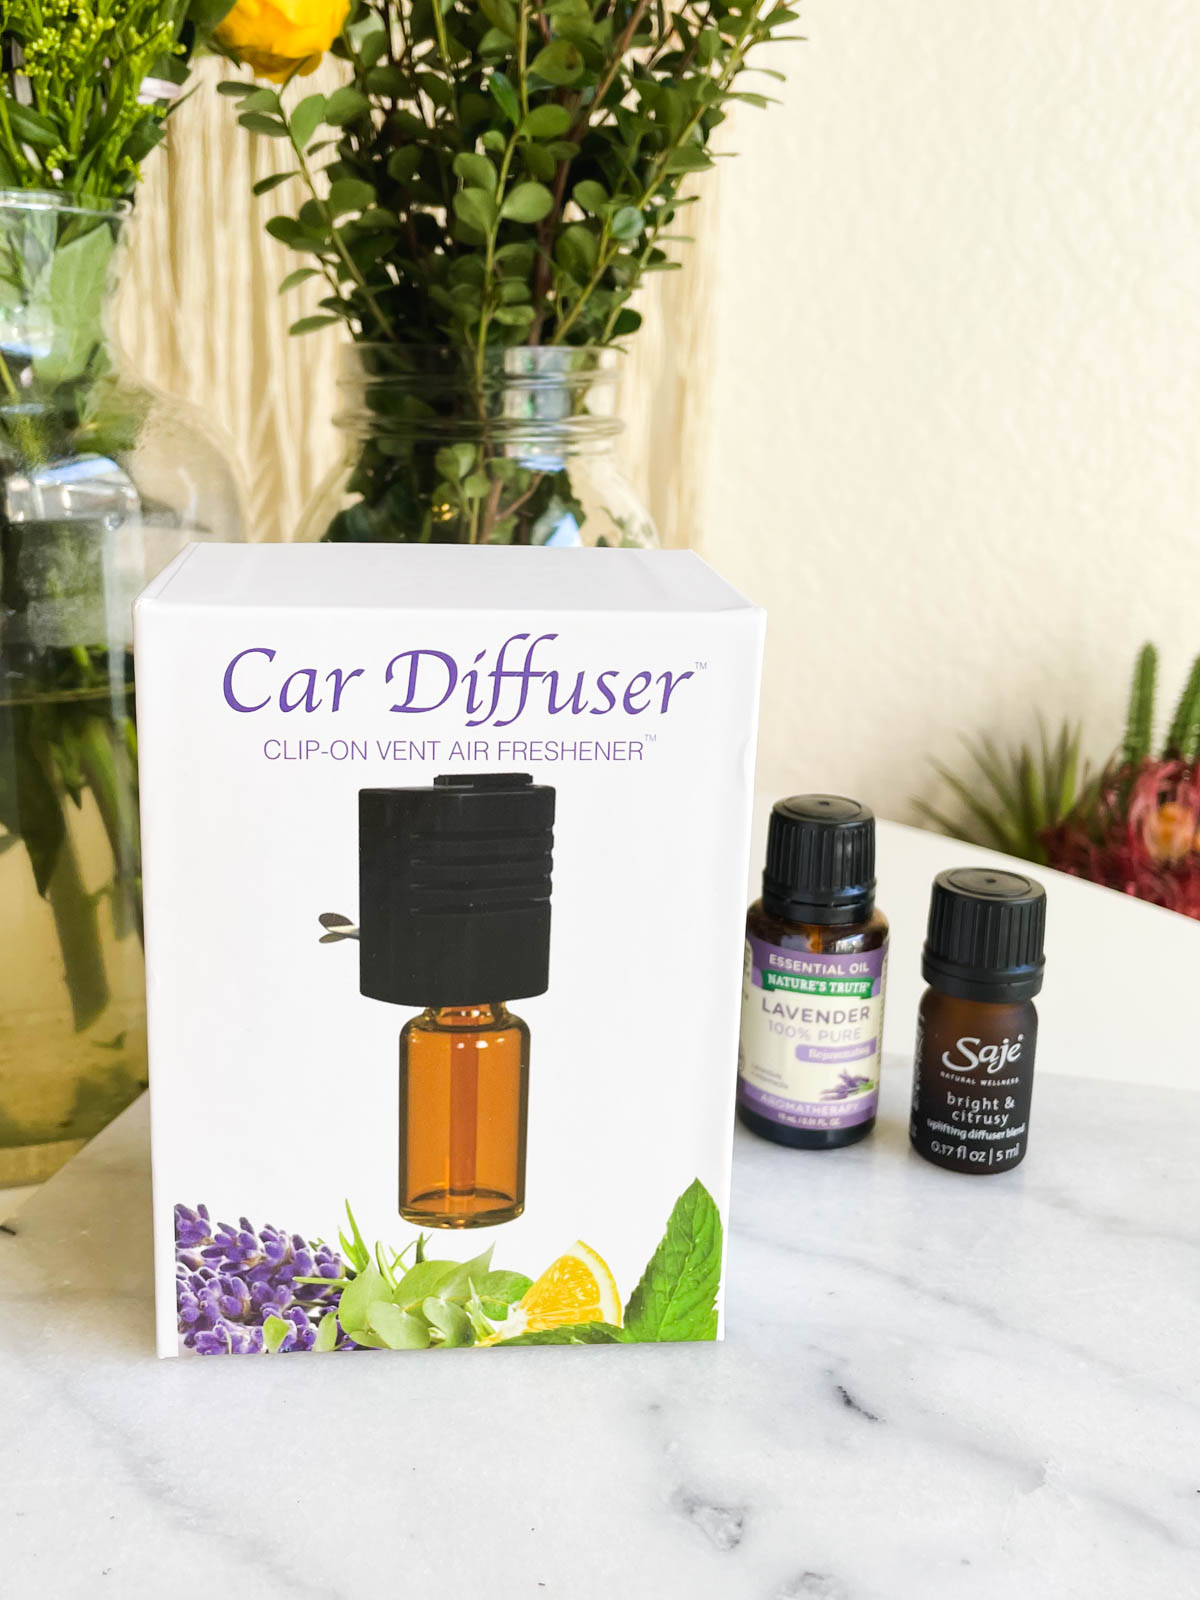 A box showing a car diffuser next to a few bottles of essential oils.